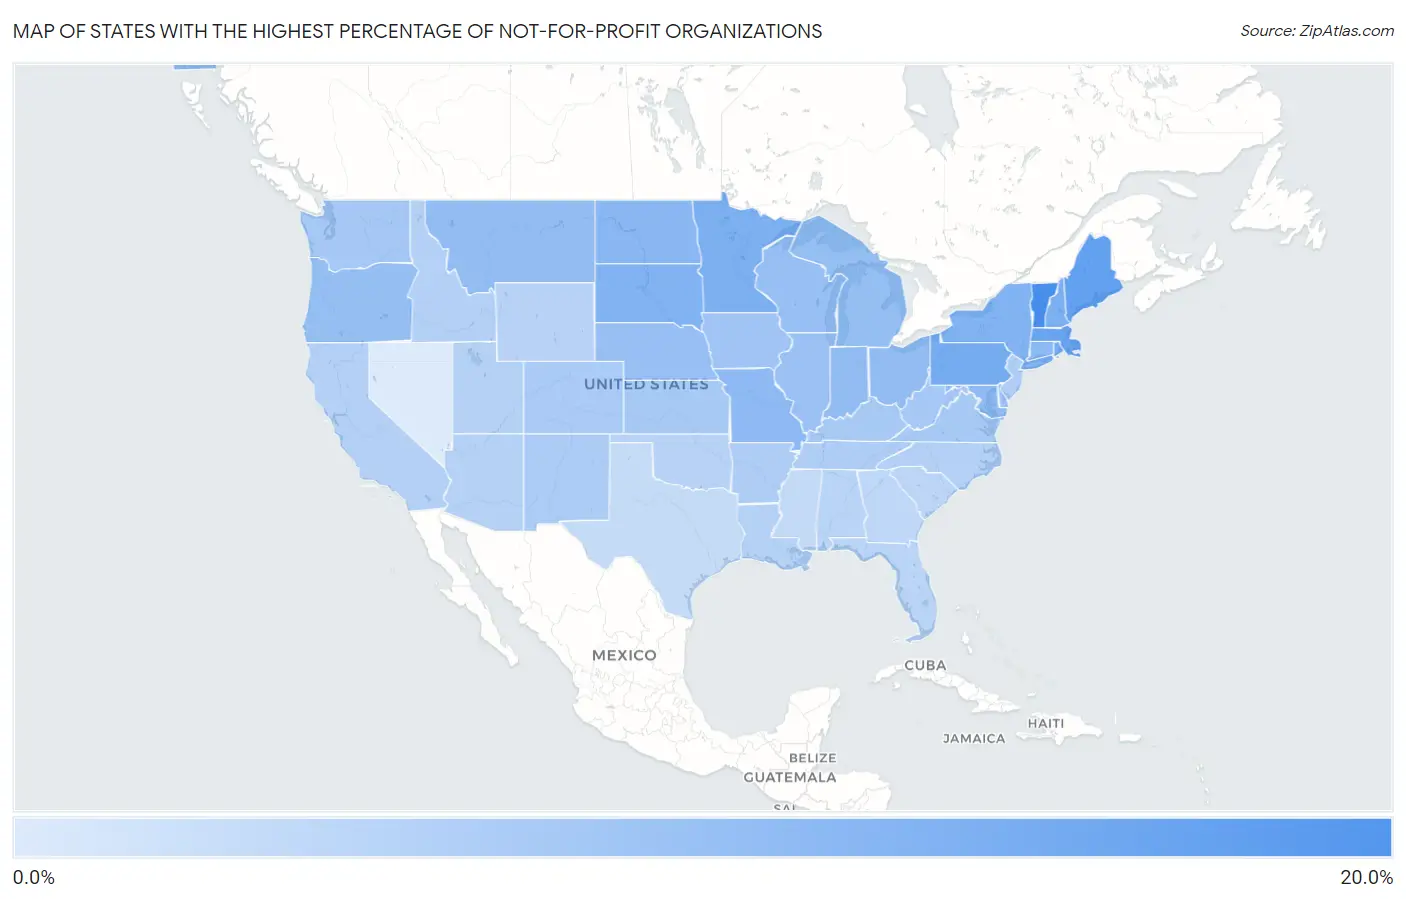 States with the Highest Percentage of Not-for-profit Organizations in the United States Map